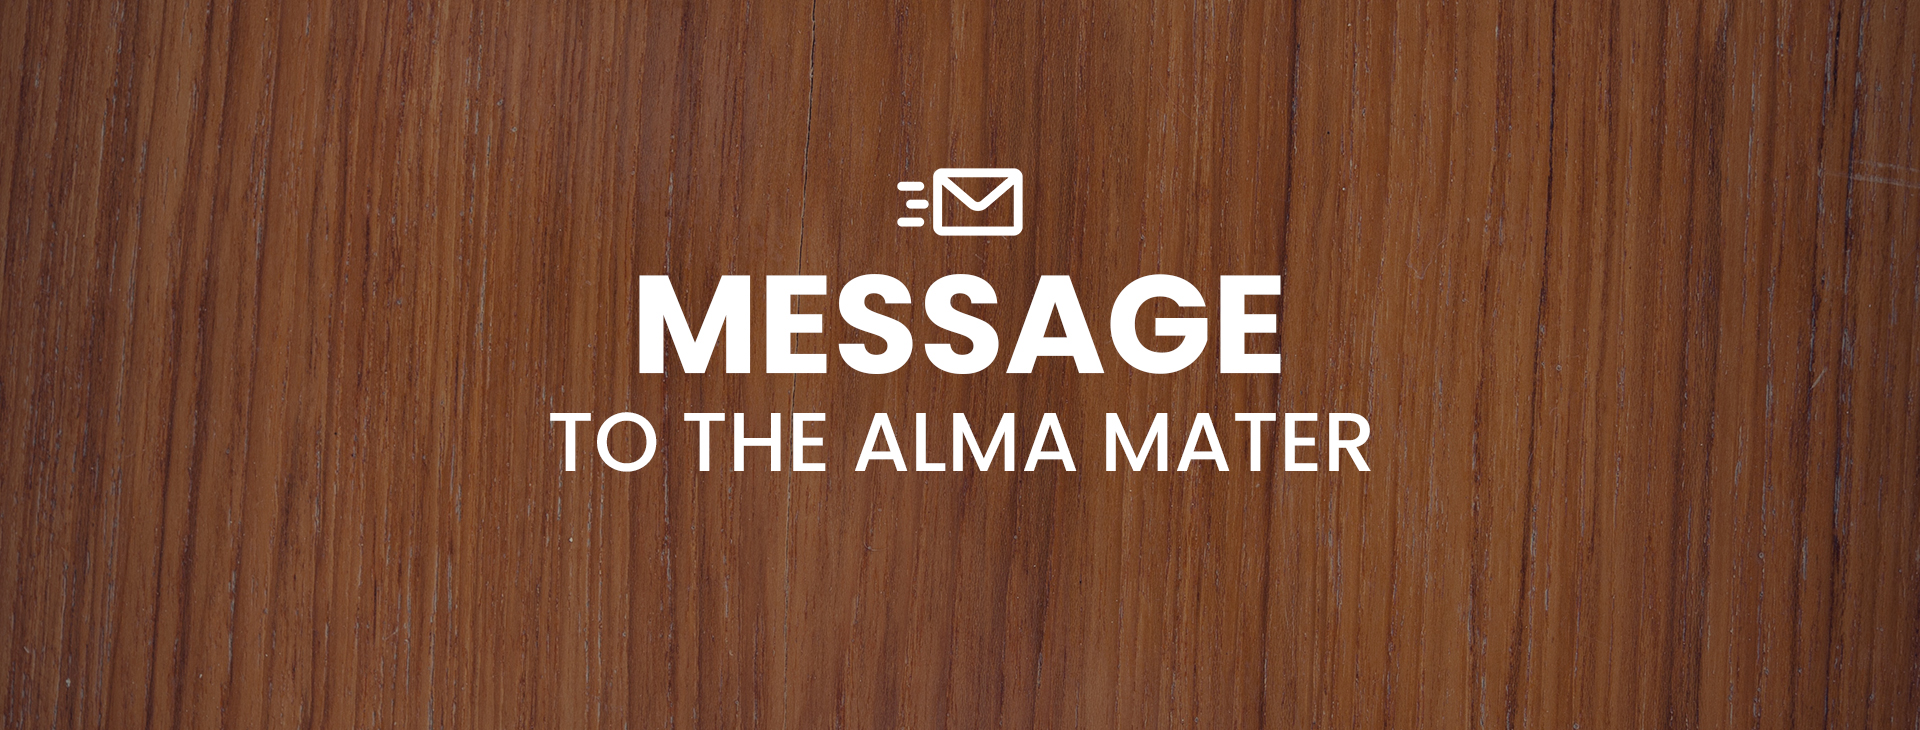 Message to alma master Banner